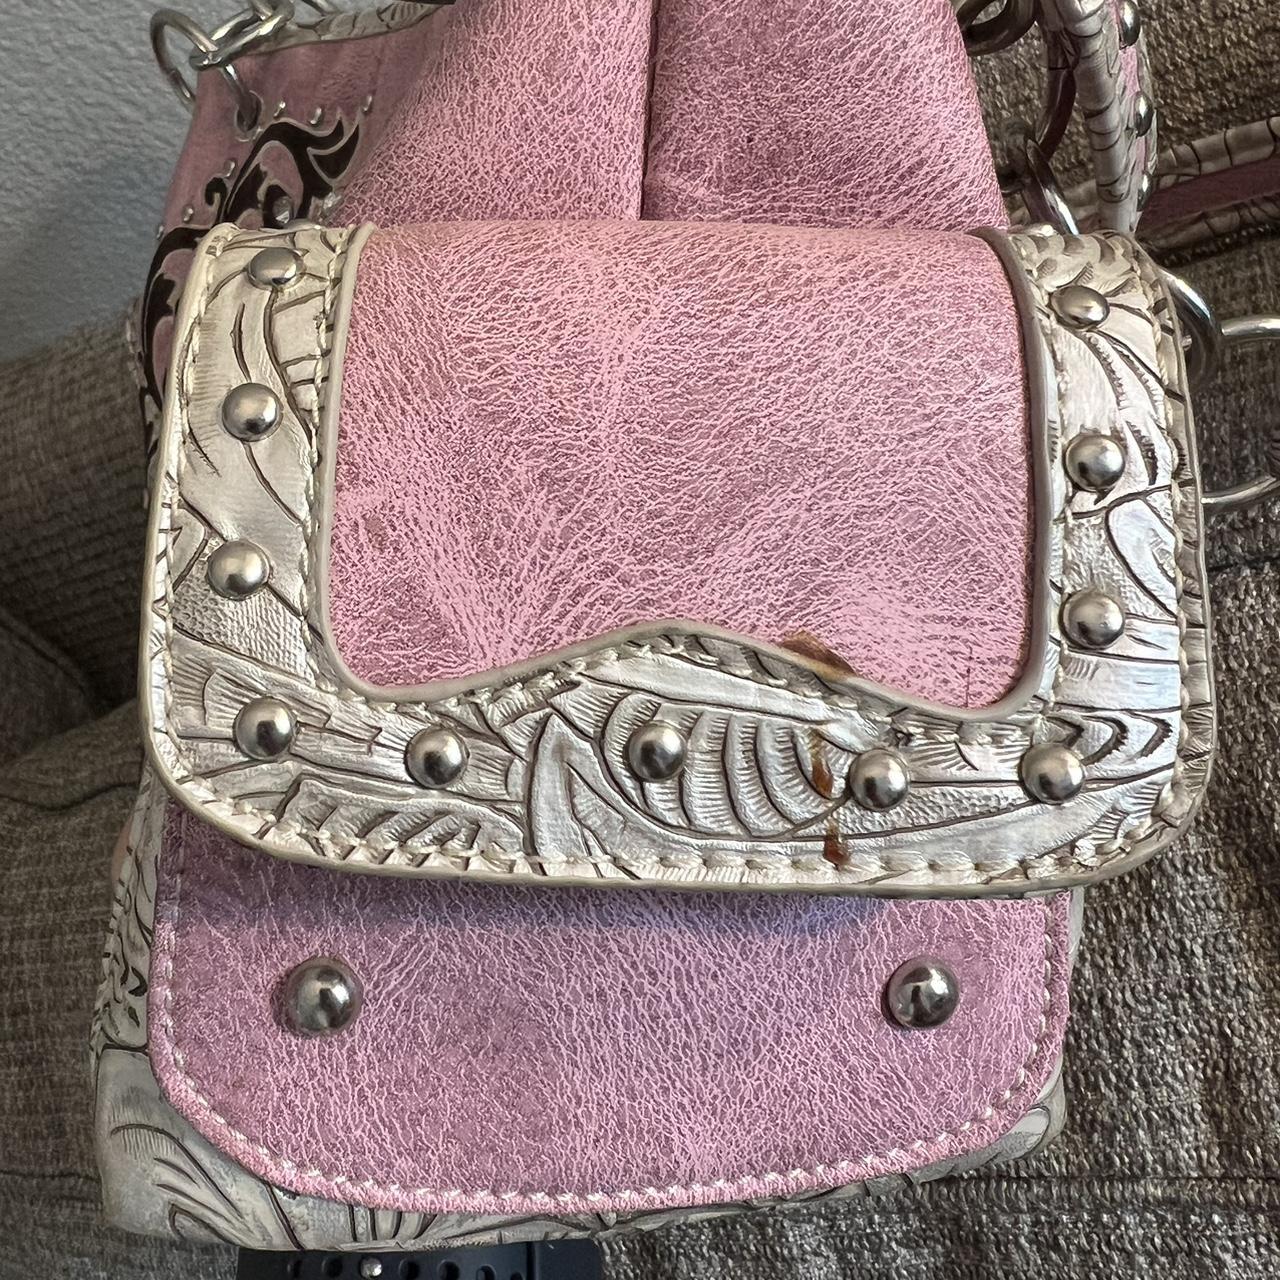 Country Road Women's Pink and Silver Bag (5)